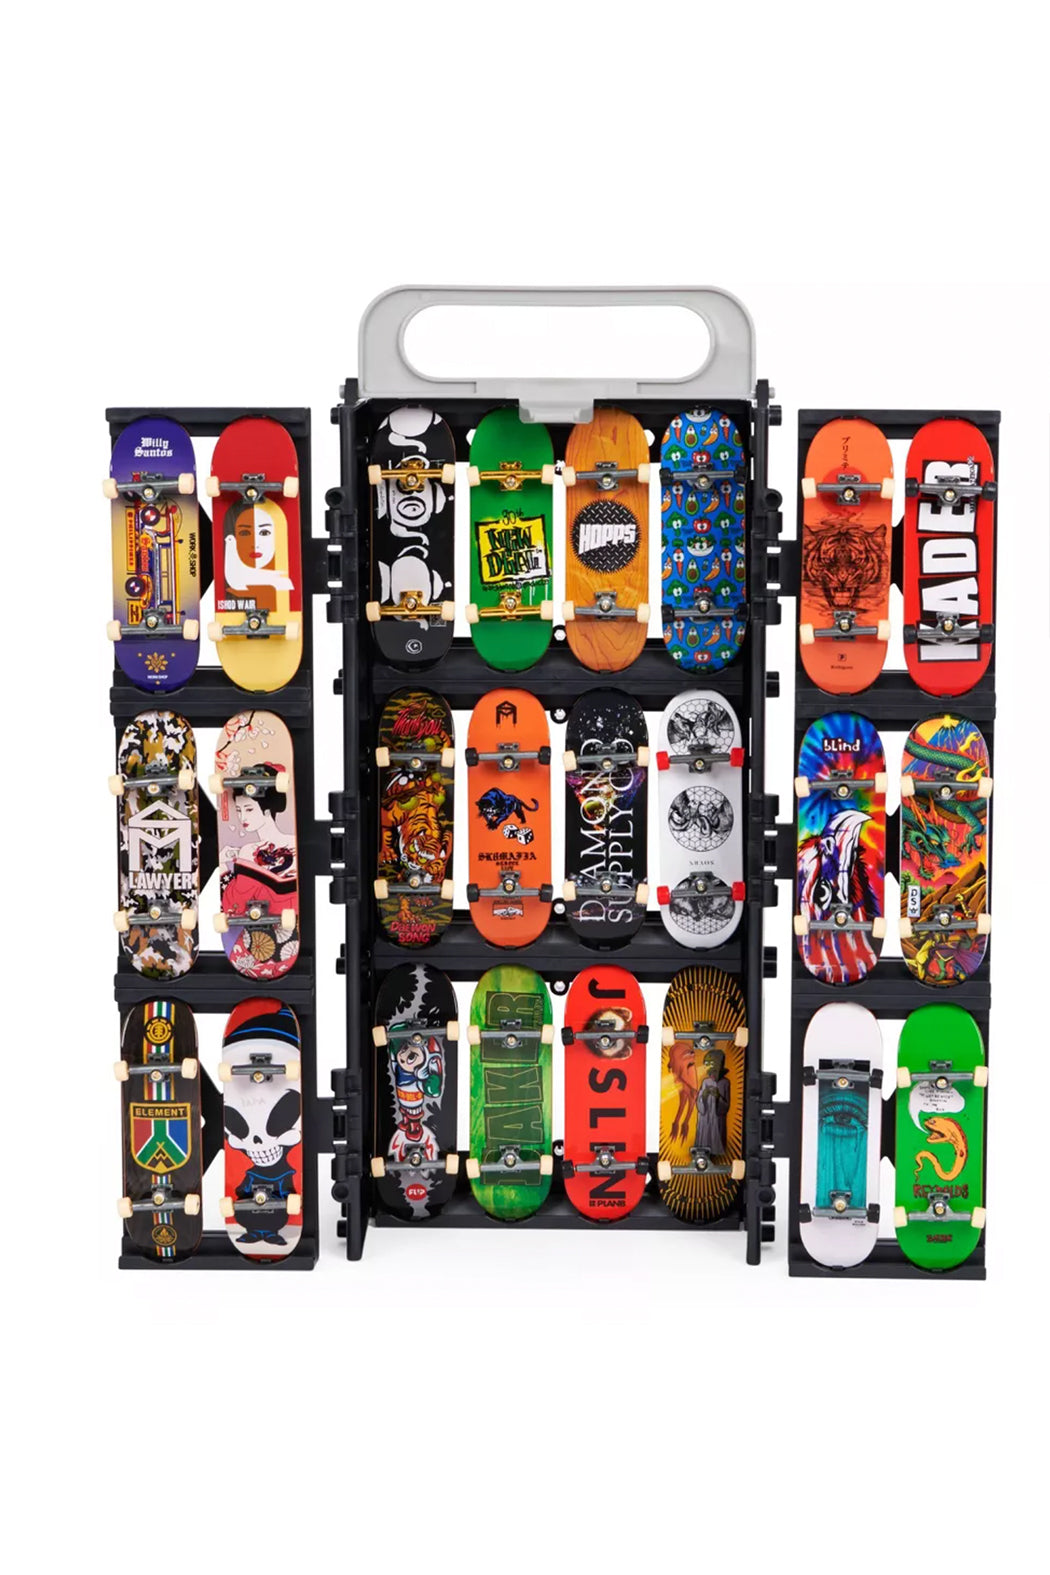 Tech Deck Play And Display